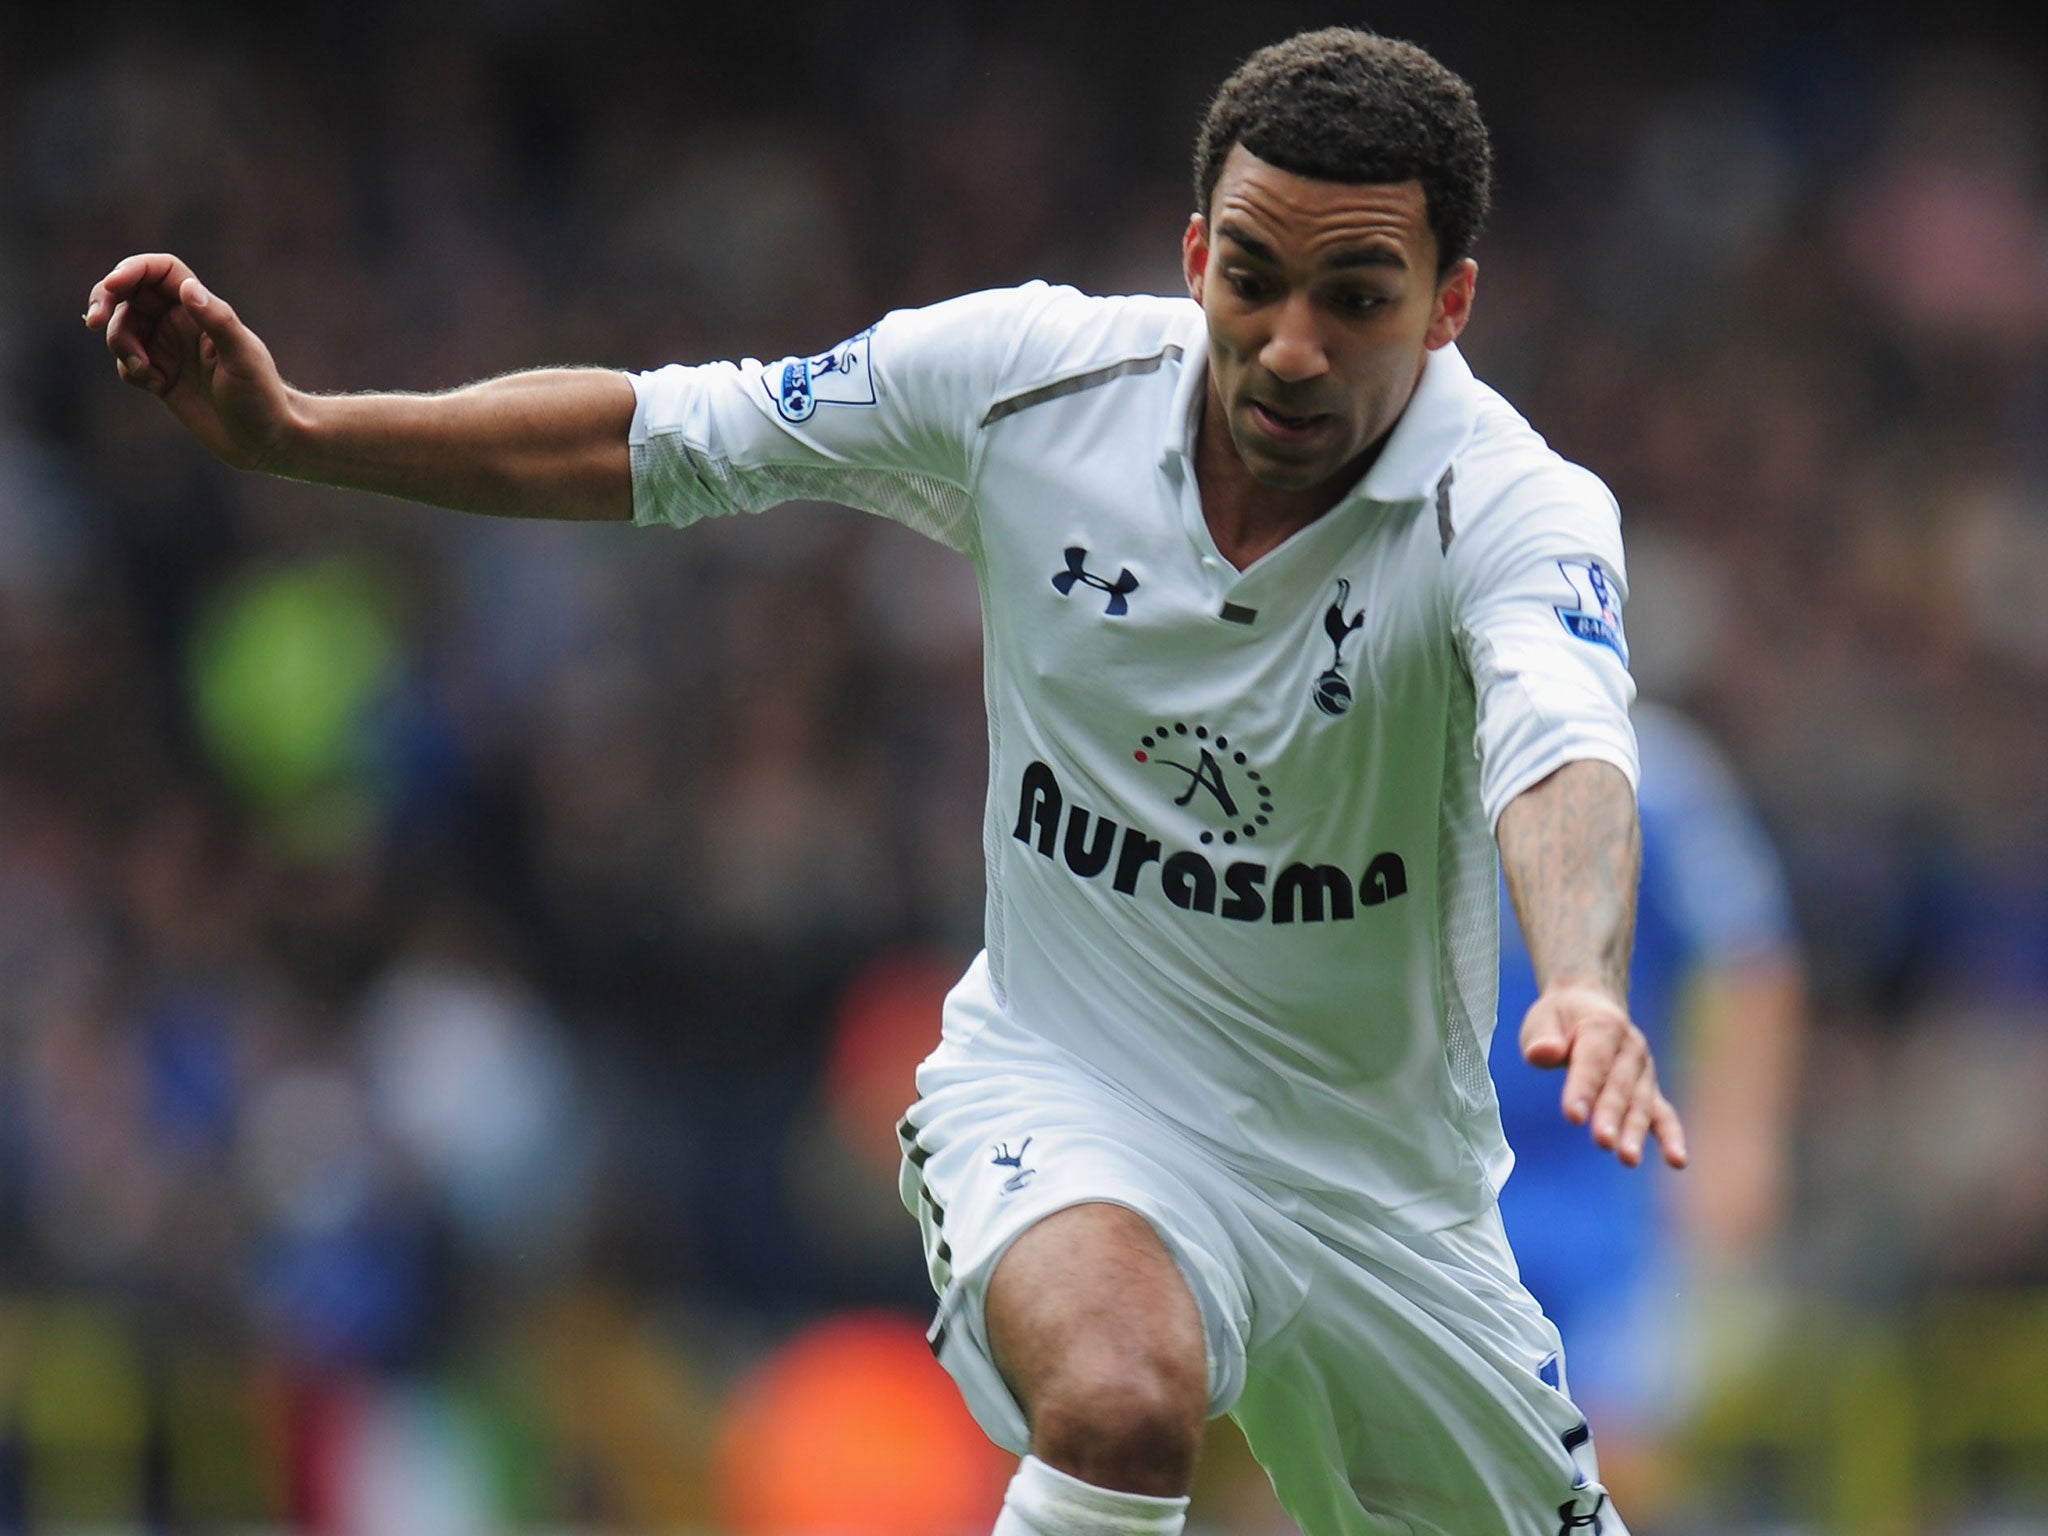 Quick learner: Tottenham legend Gary Mabbutt believes Aaron Lennon can be compared to Spurs’ great wingers David Ginola and Chris Waddle